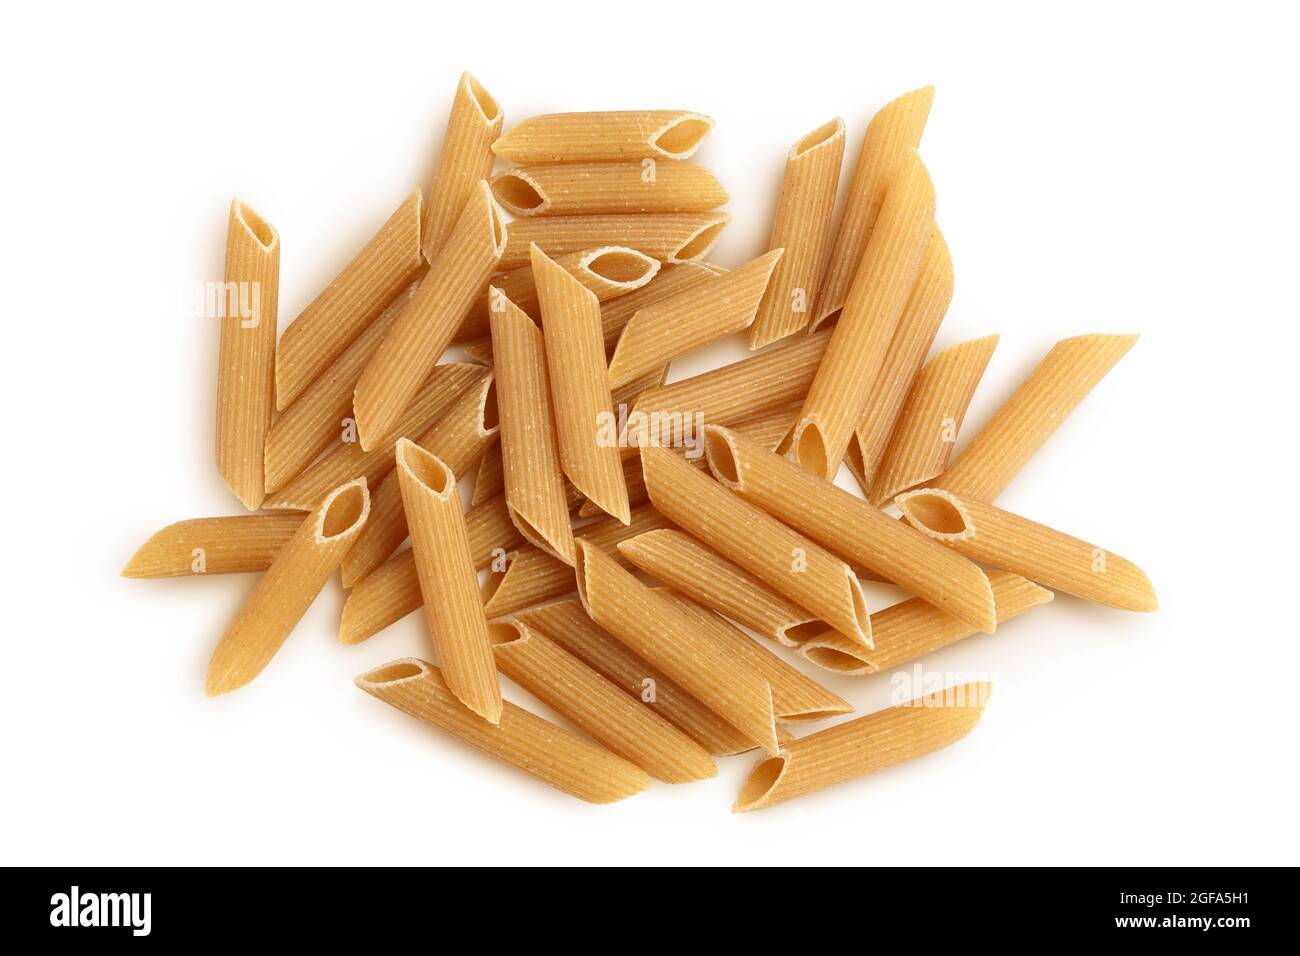 Wolegrain penne pasta from durum wheat isolated on white background with clipping path and full depth of field. Top view. Flat lay, Stock Photo